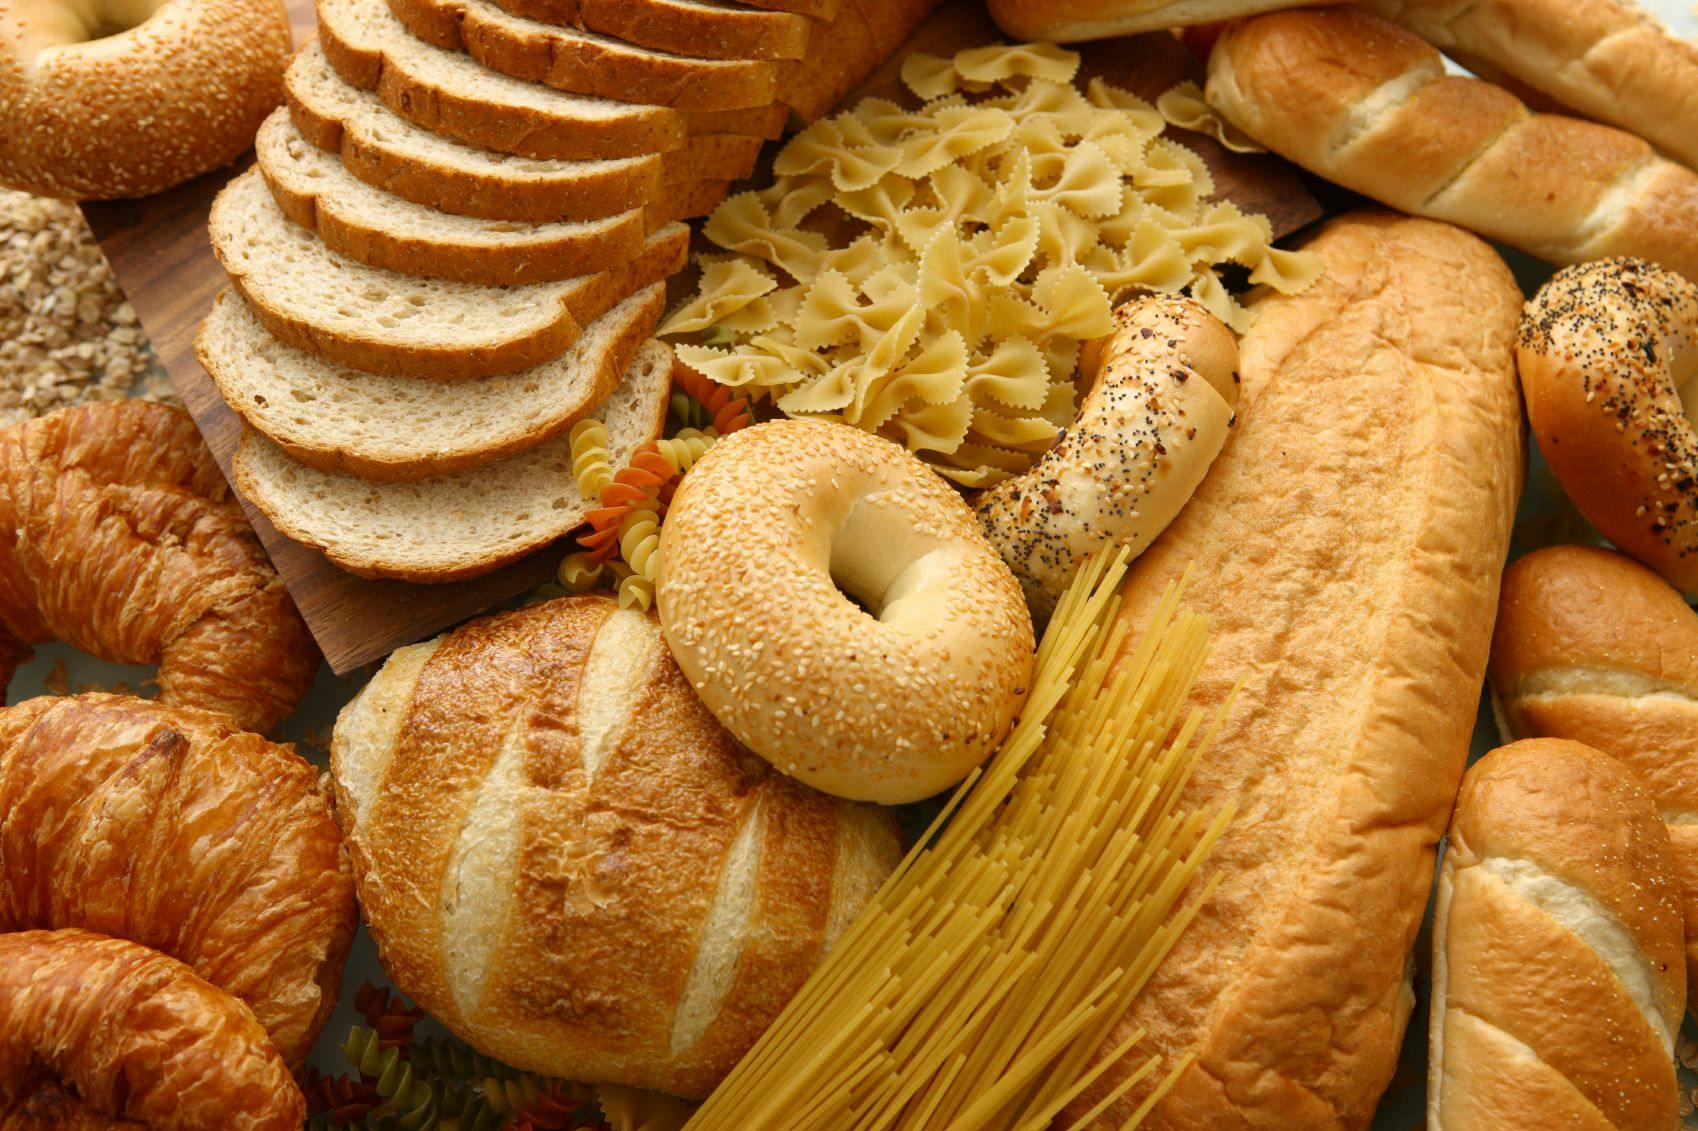 Consumers Likely Underestimate How Carbs Contribute to Weight Gain, Survey Finds